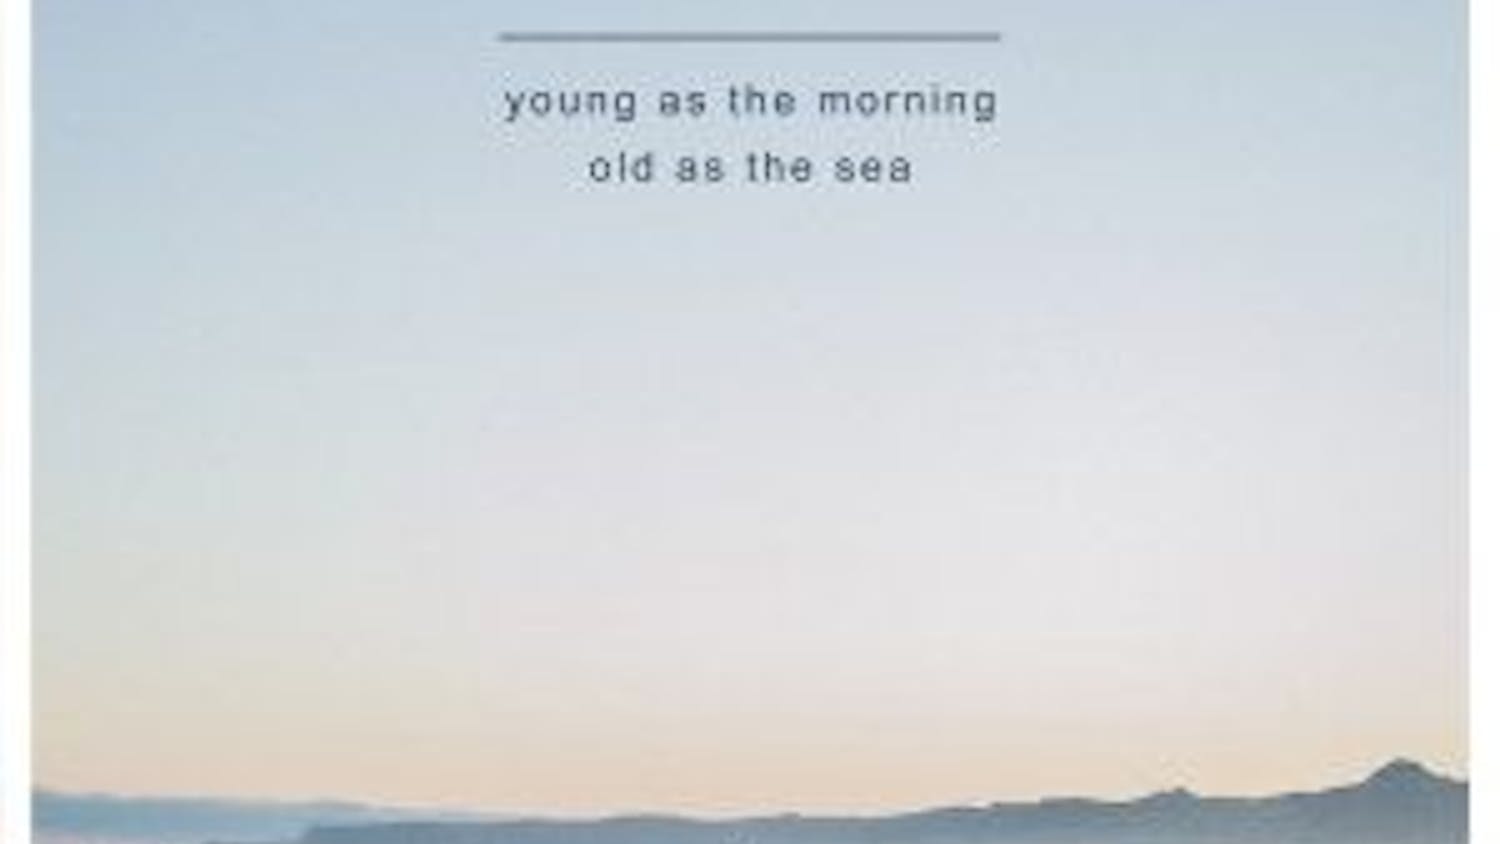 Passenger's "Young as the morning old as the sea" emphasizes themes of love, wisdom and age with relatable lyrics and a melancholy feel.